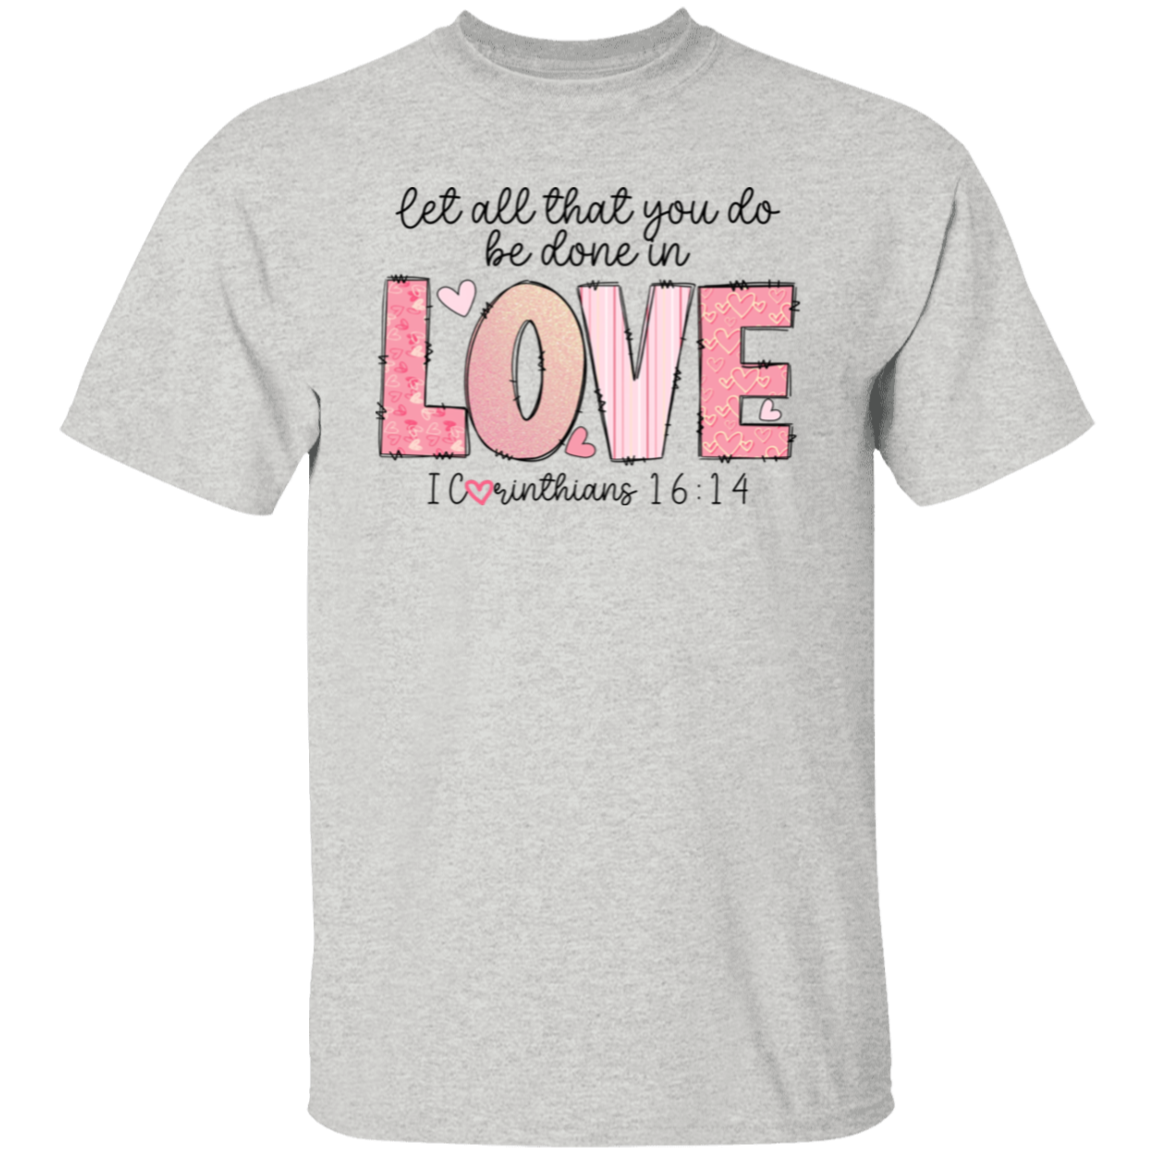 Let All that you do be done in Love T-Shirt